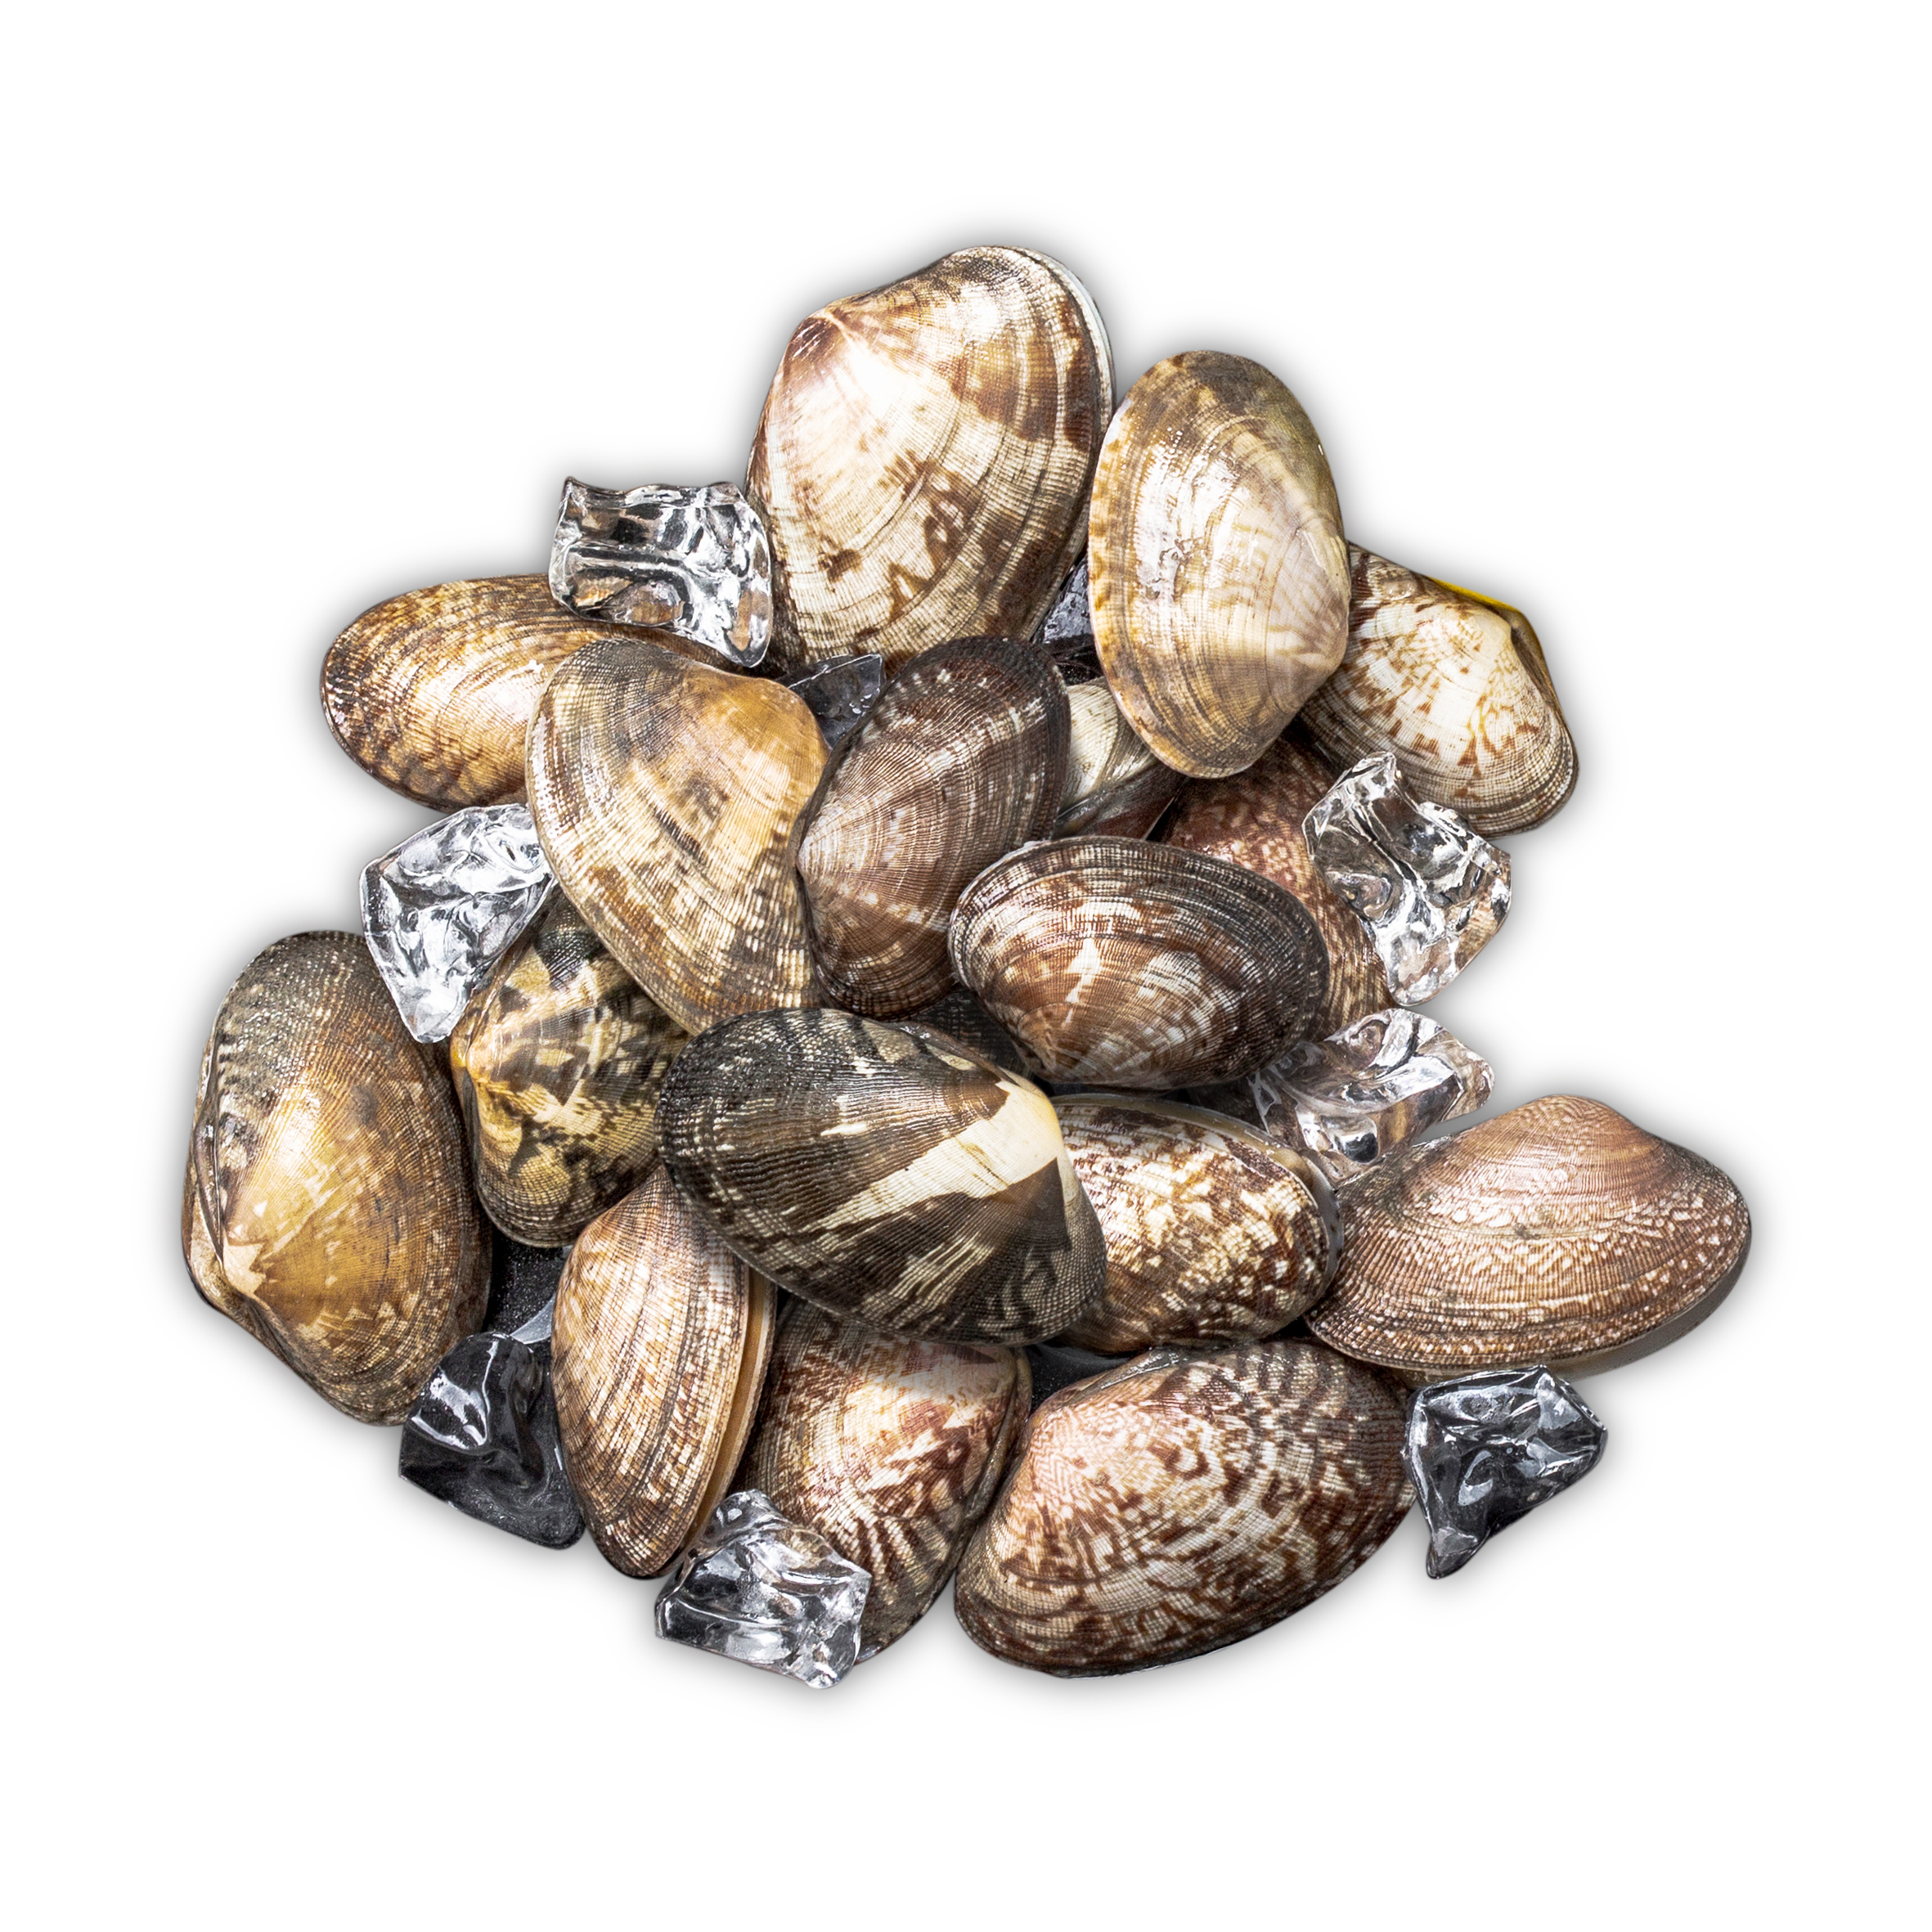 Top Suppliers P-Cod Fillet Supplier In China - clam – Makefood